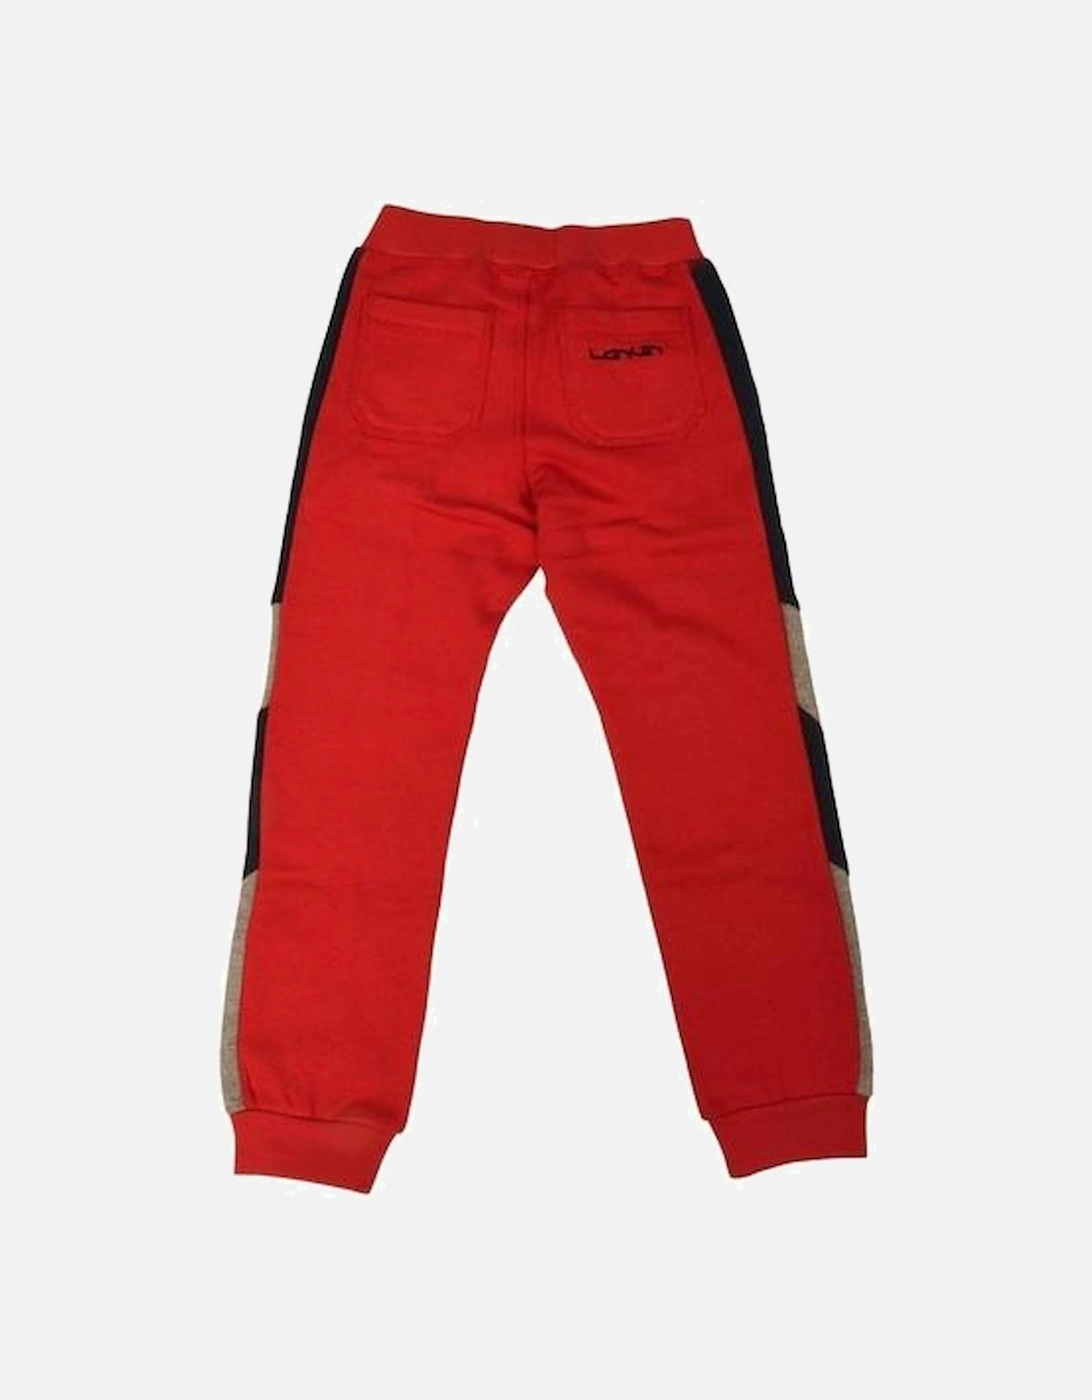 Boys Red/ Navy Joggers